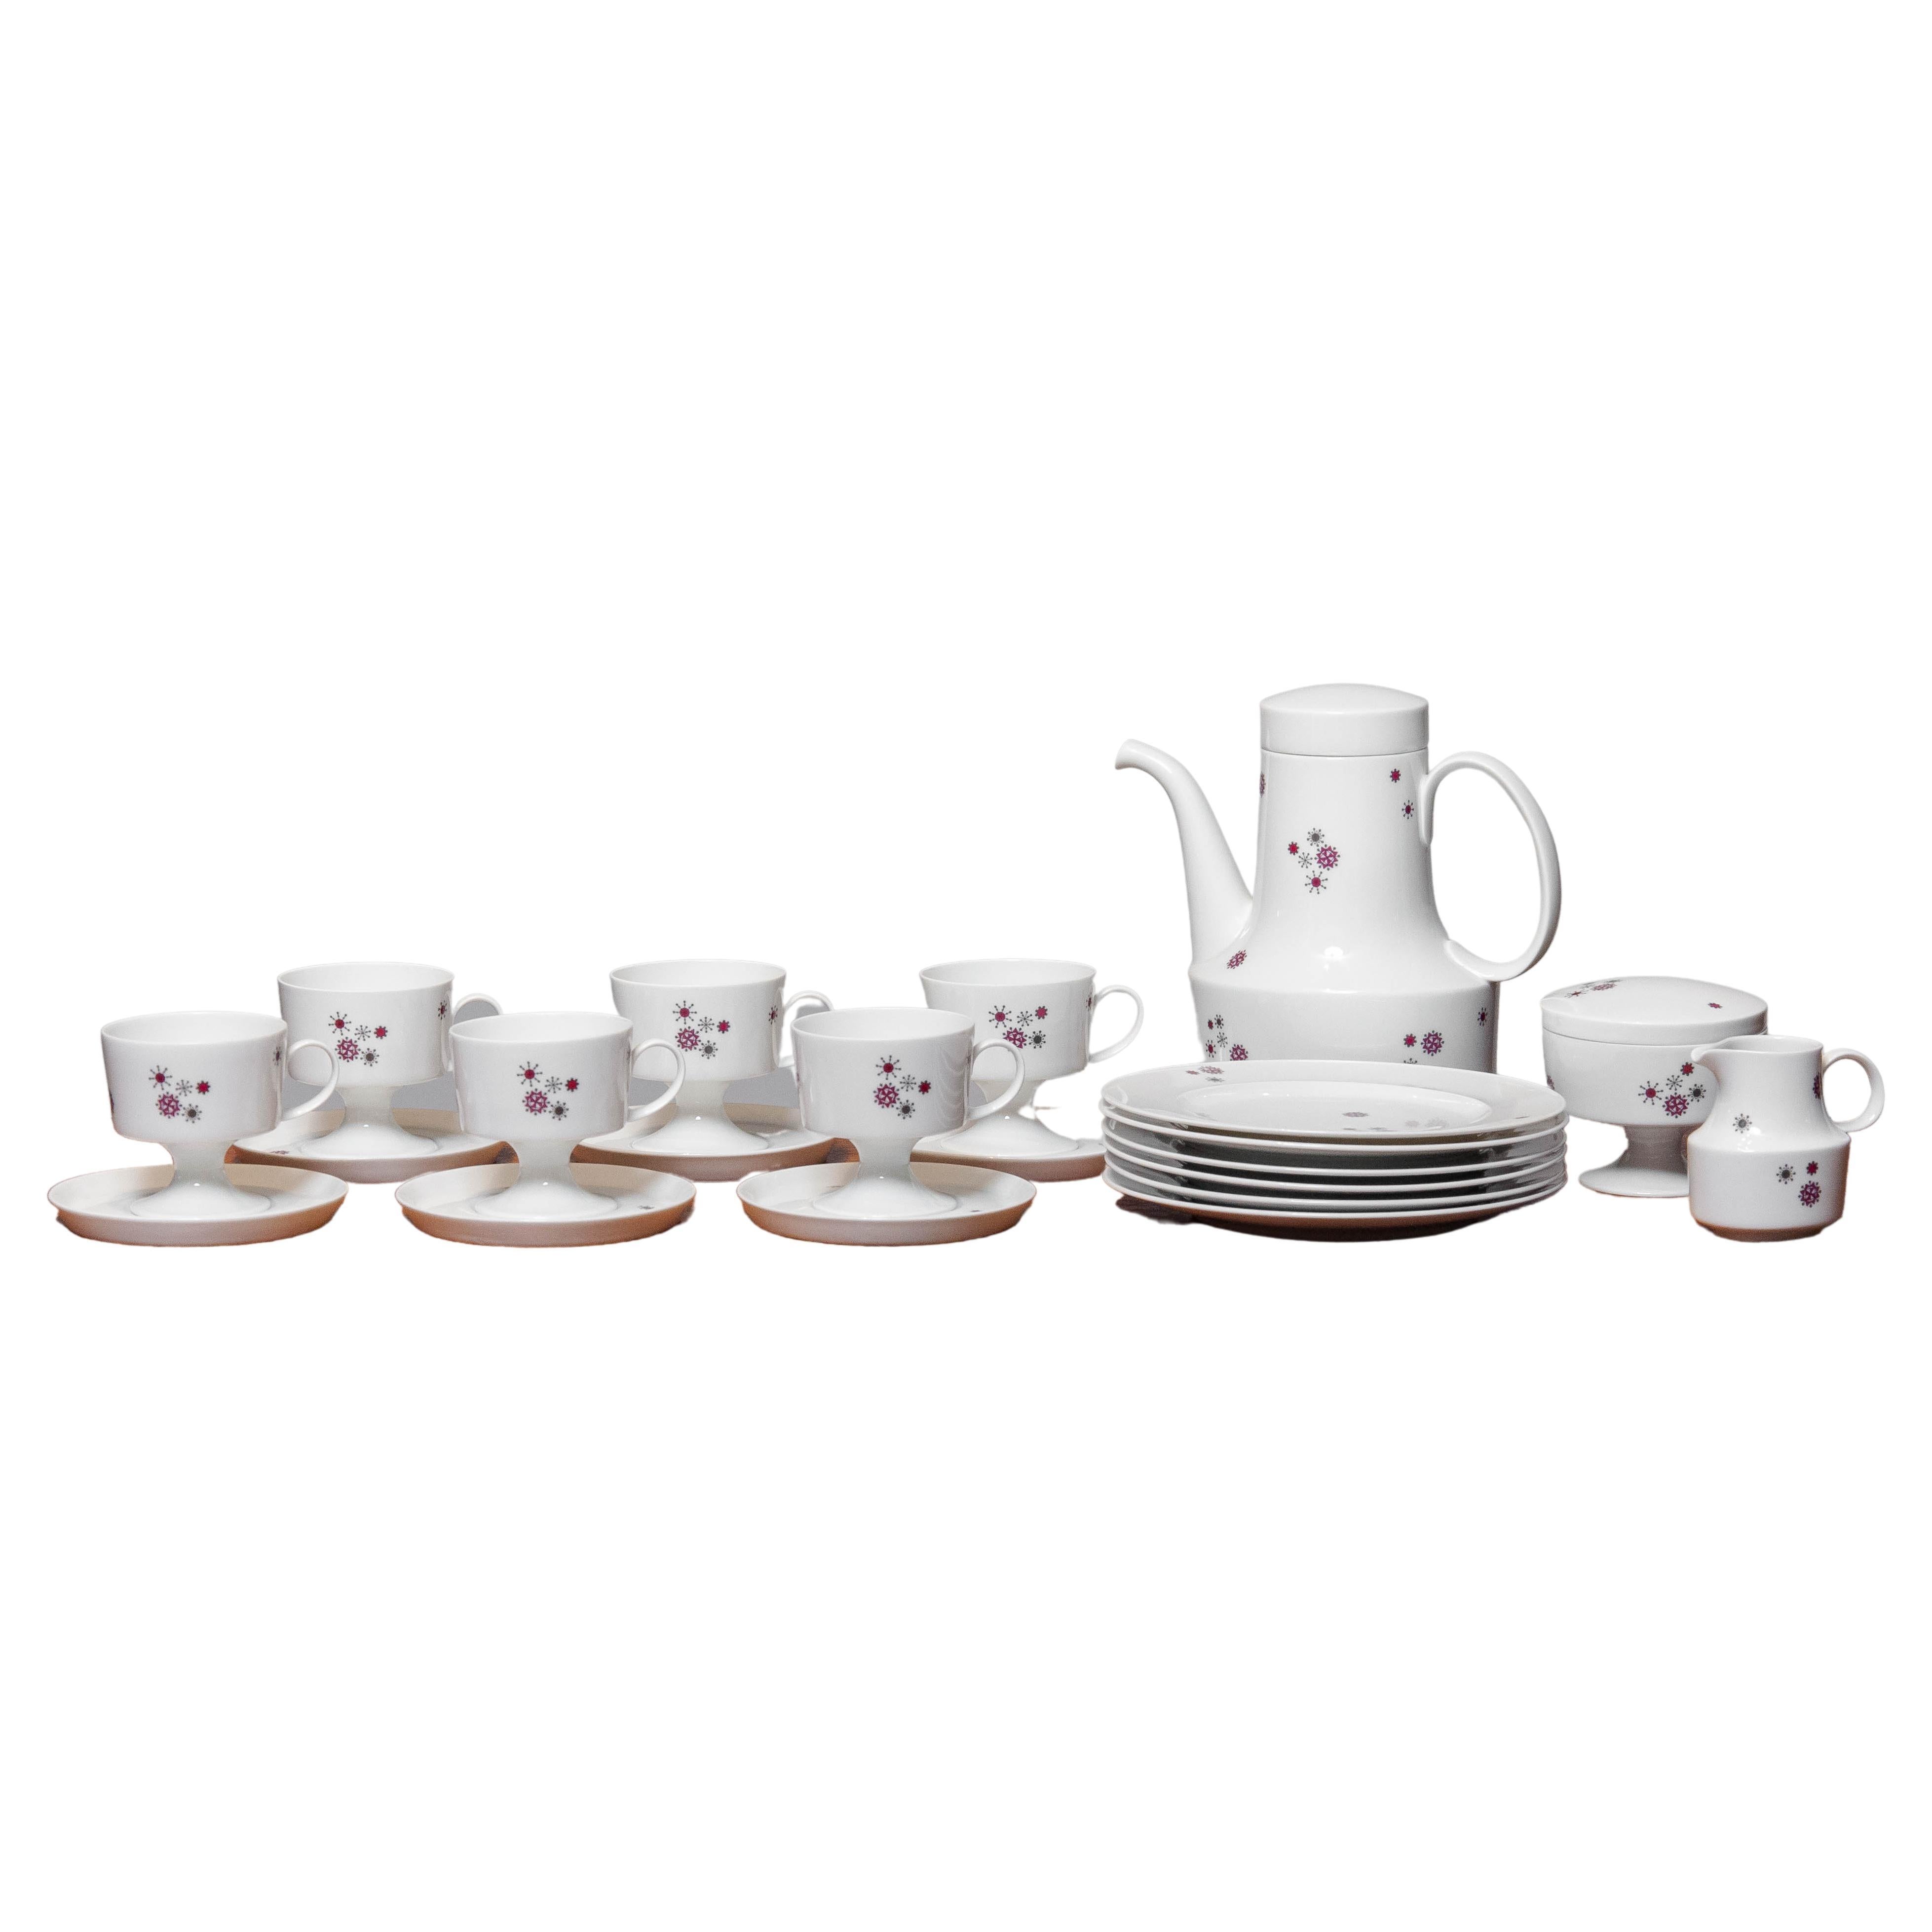 1960's Tea Set For Six Persons by Tapio Wirkkala And Ute Schröder For Rosenthal